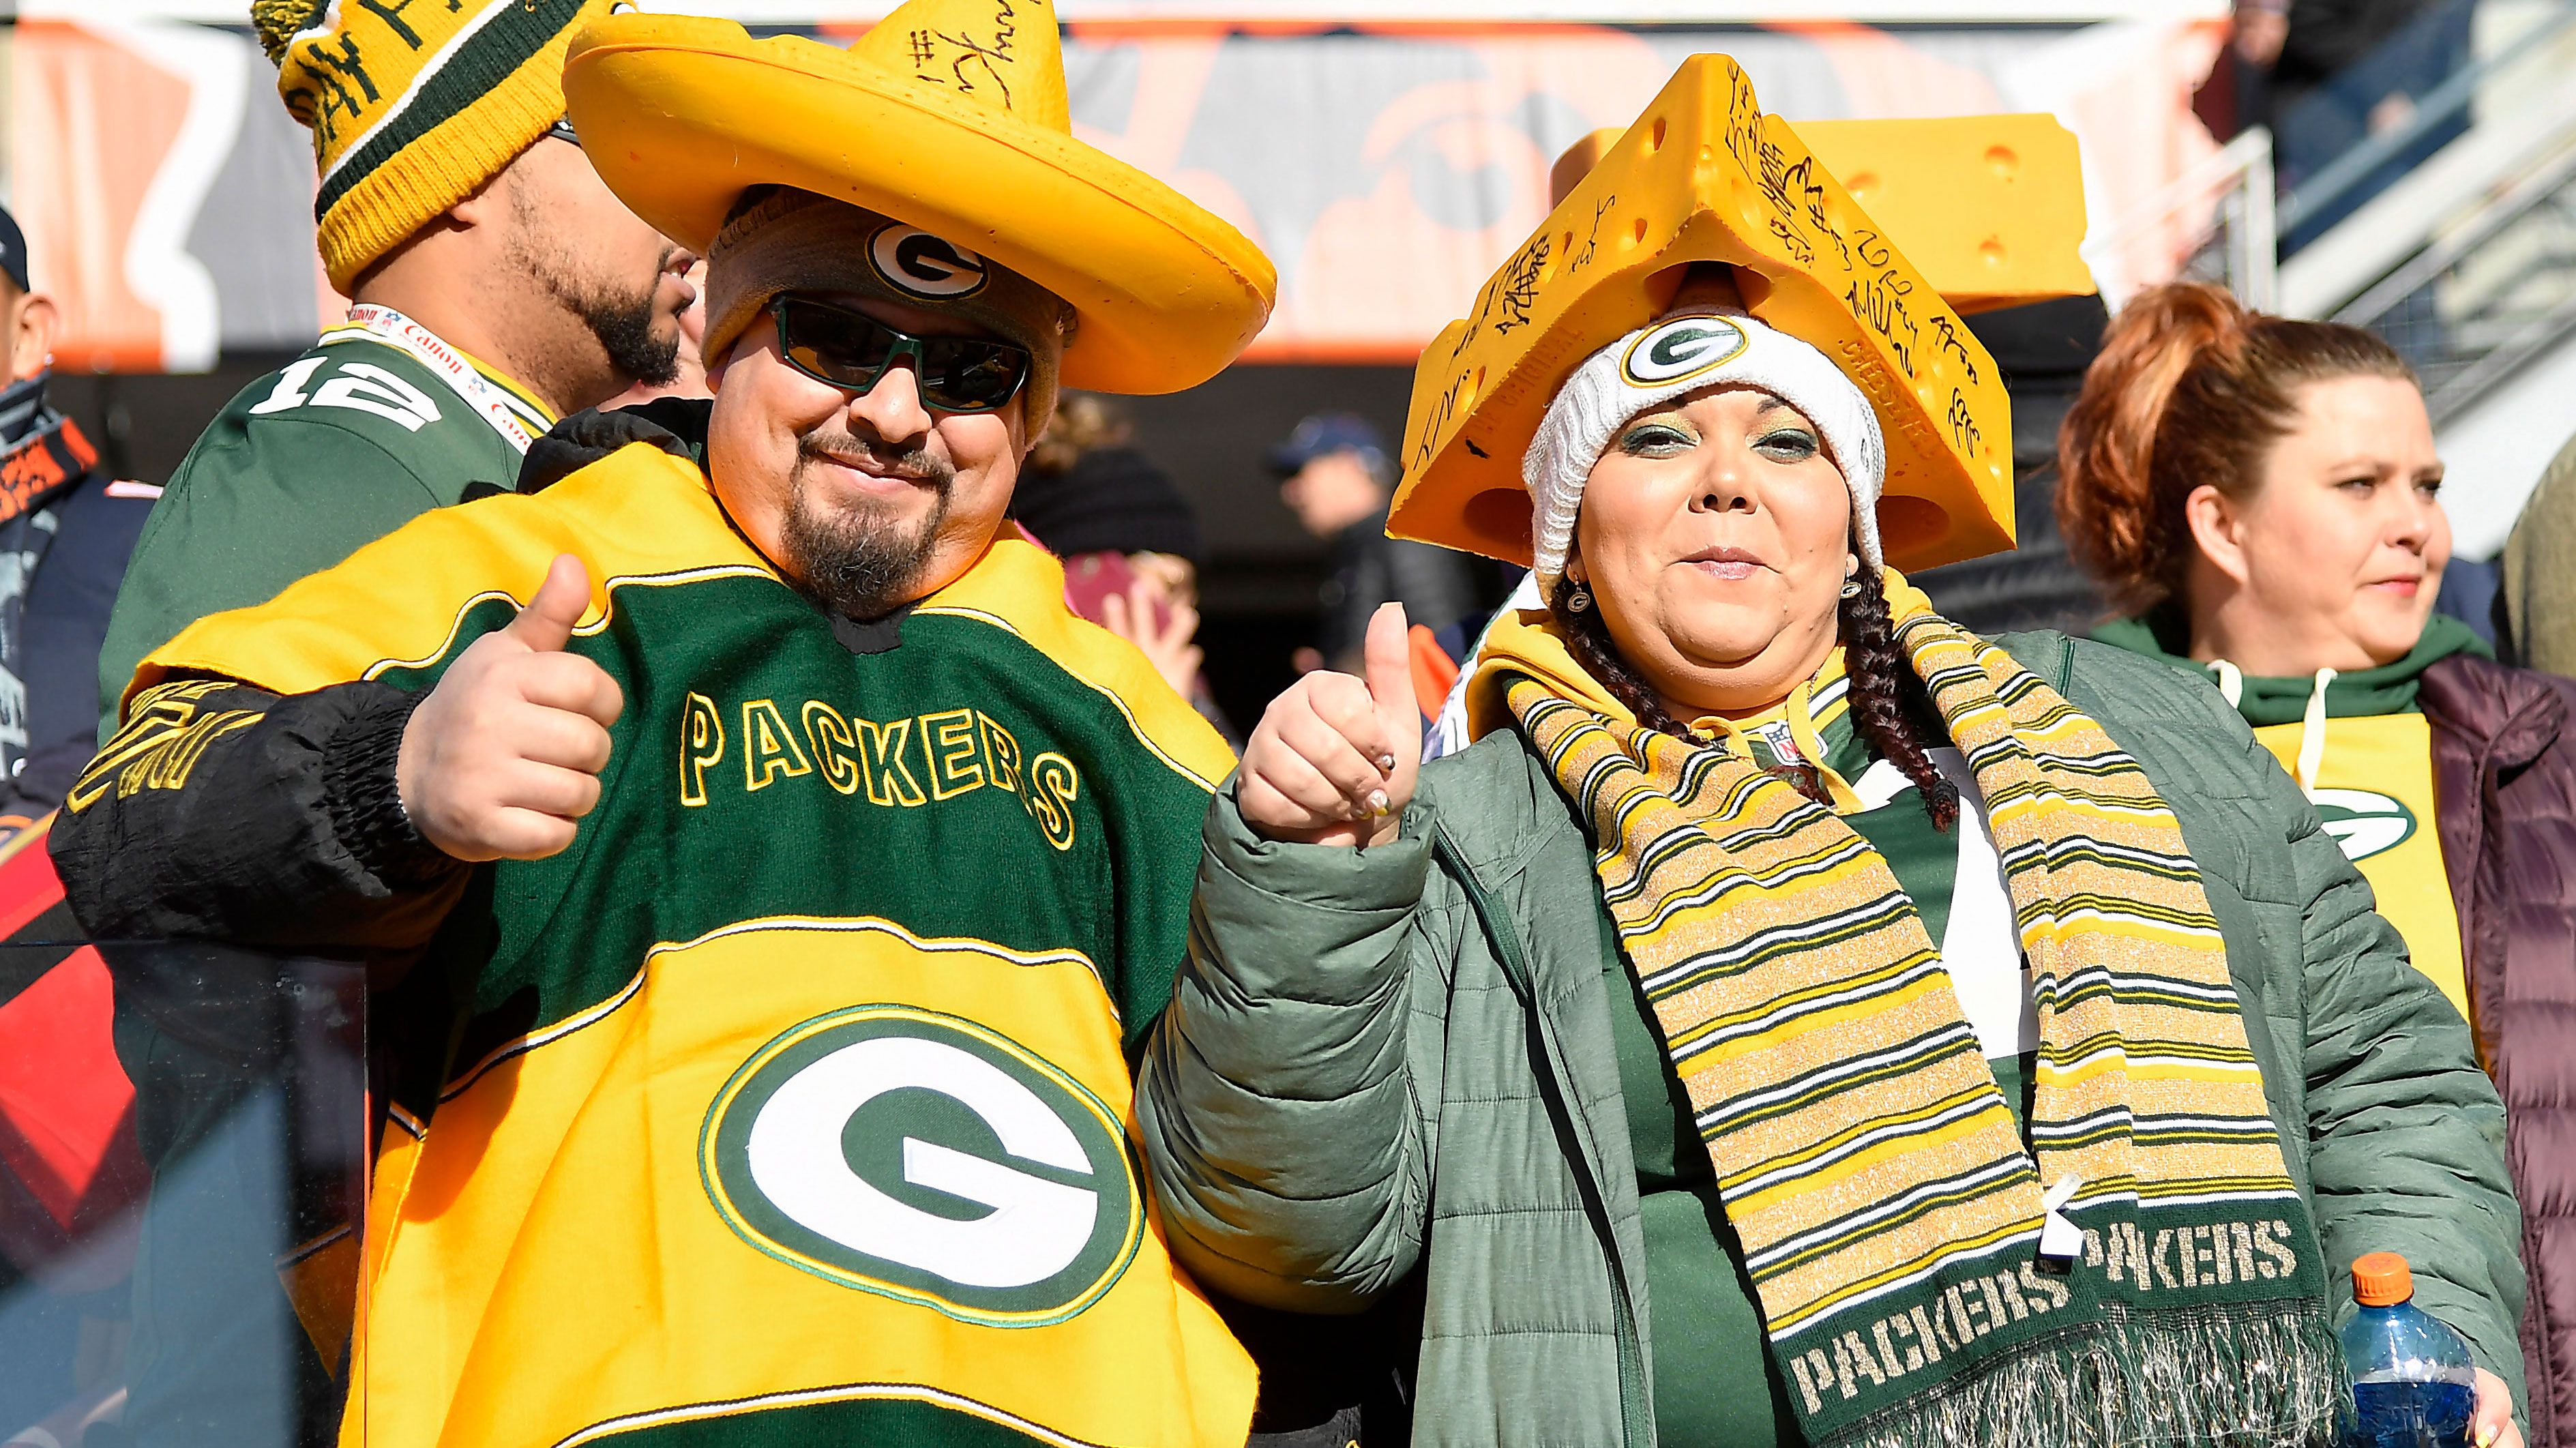 Green Bay Packers fans